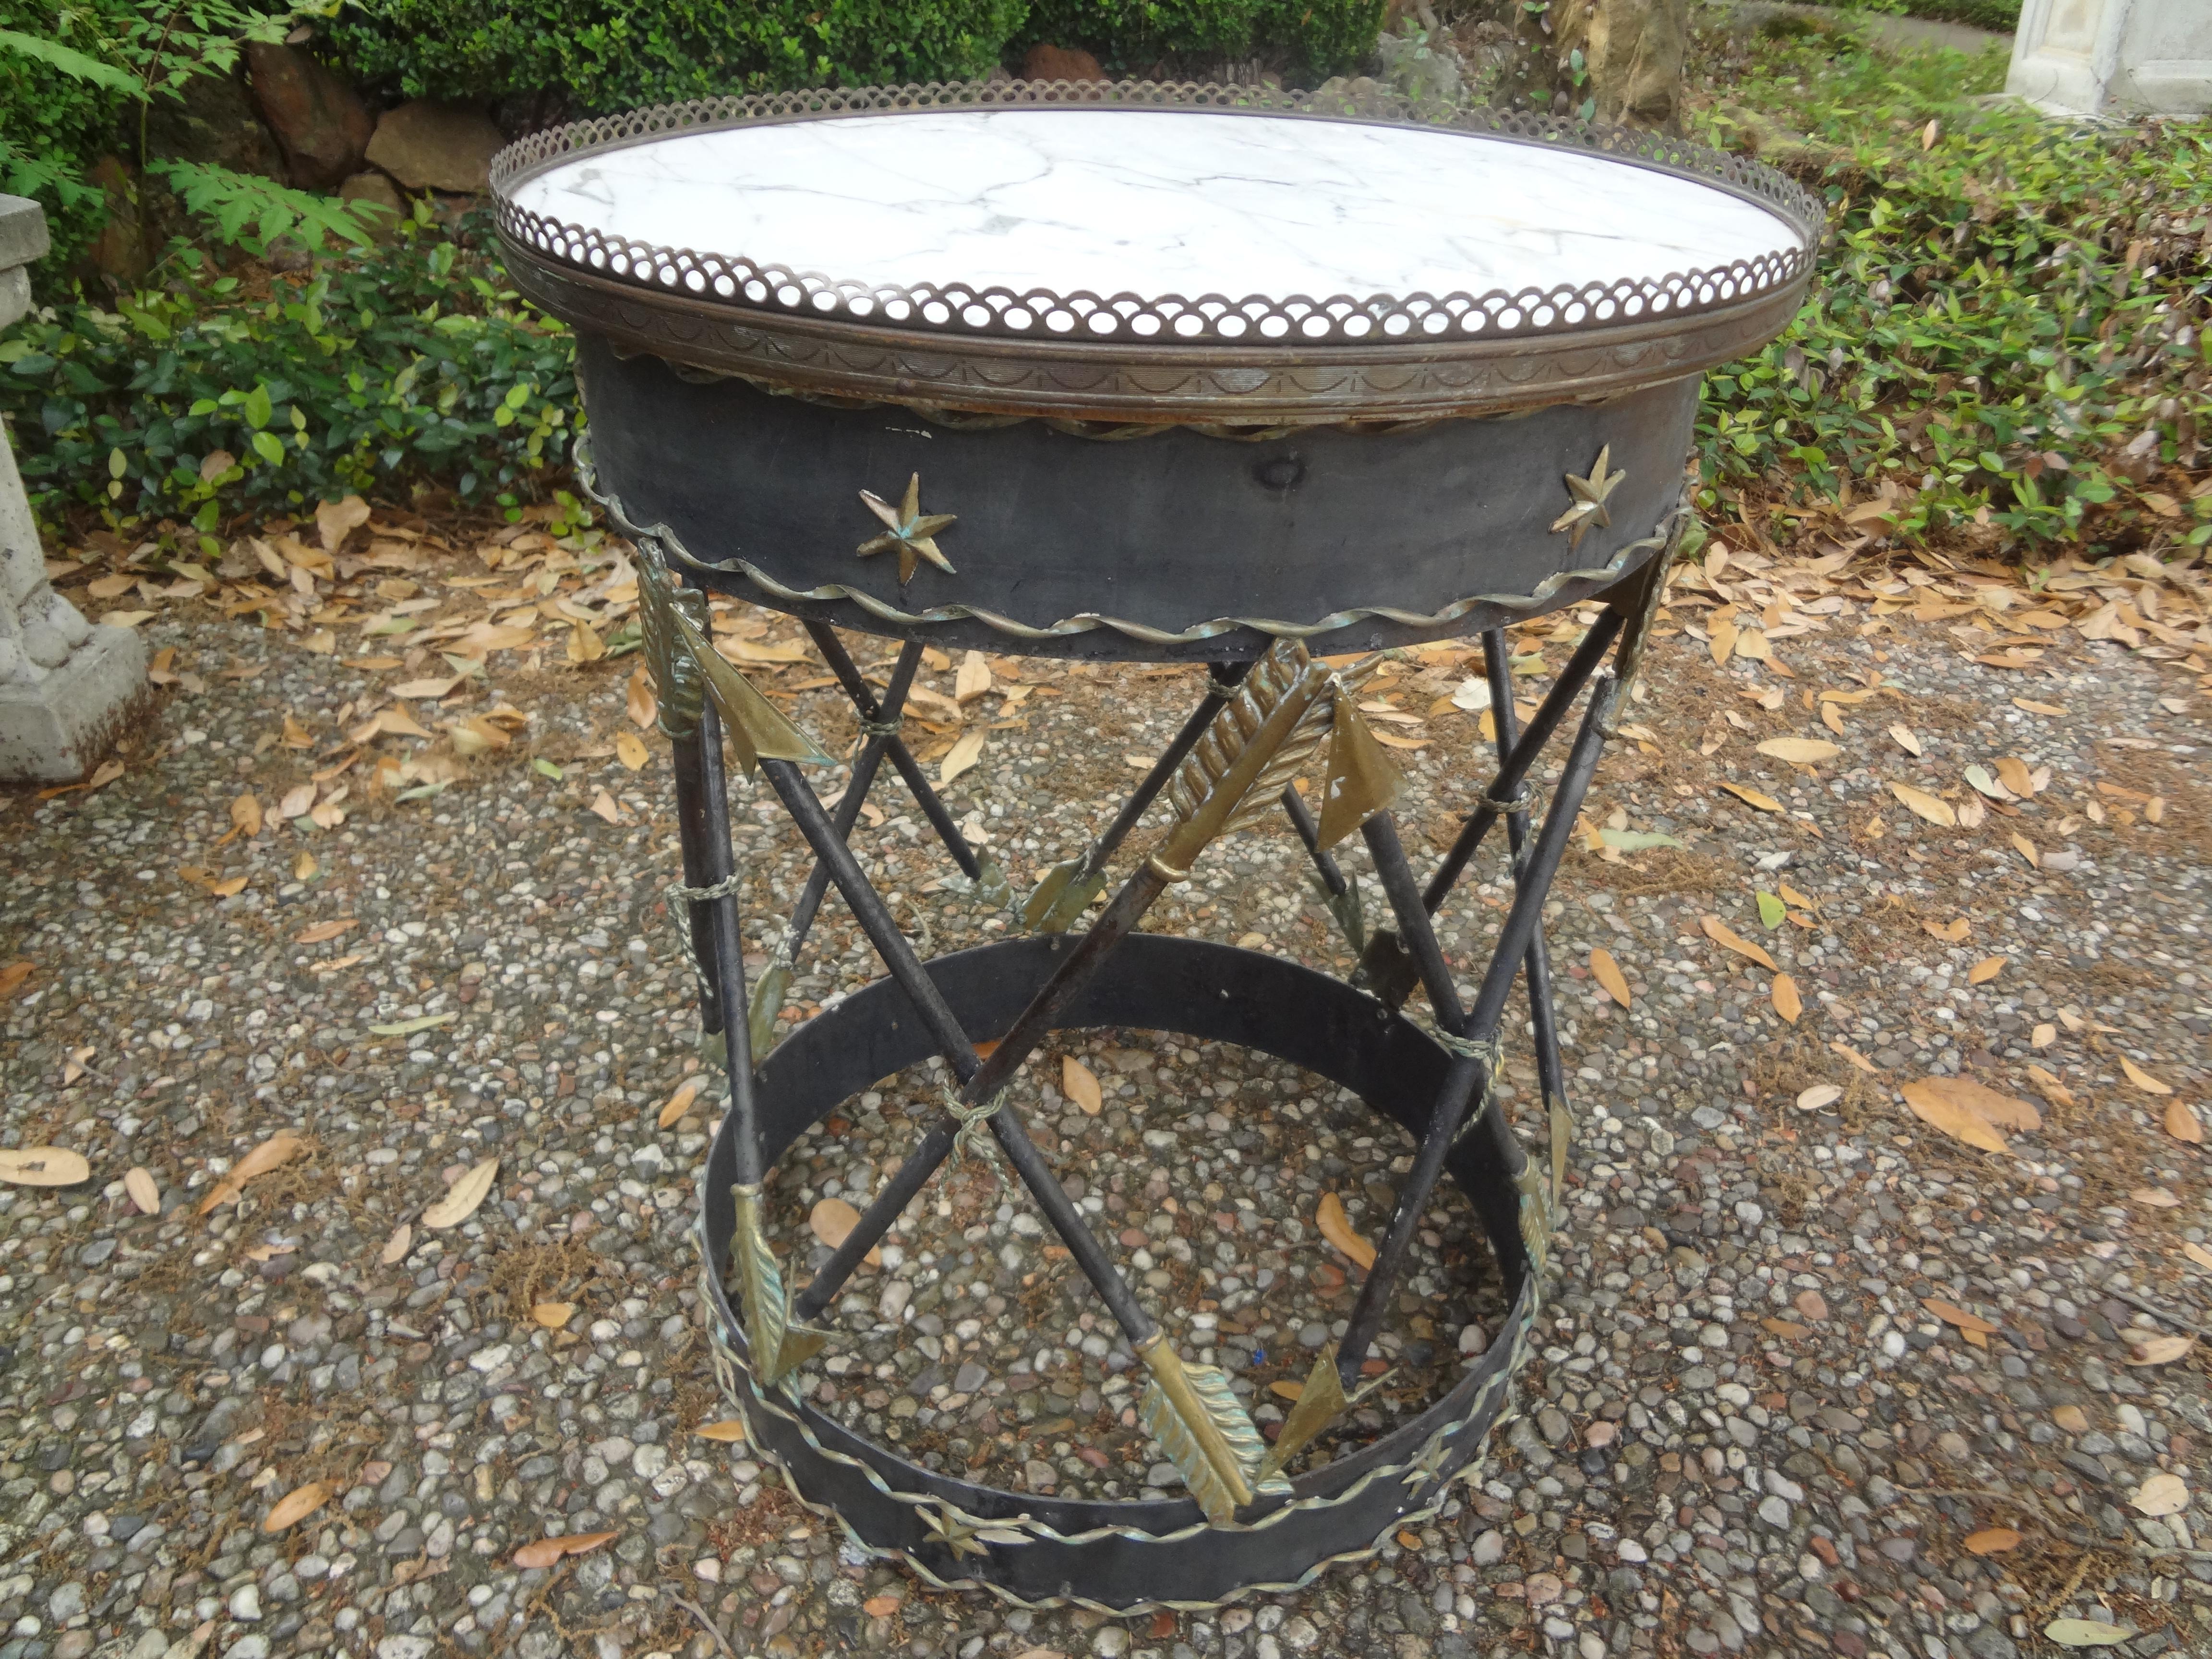 Italian Neoclassical style iron and tole table with arrows.
Stunning vintage Italian neoclassical style iron and tole drum table with arrows, stars and a marble top. This versatile side table, drink table, or gueridon is perfect between two chairs